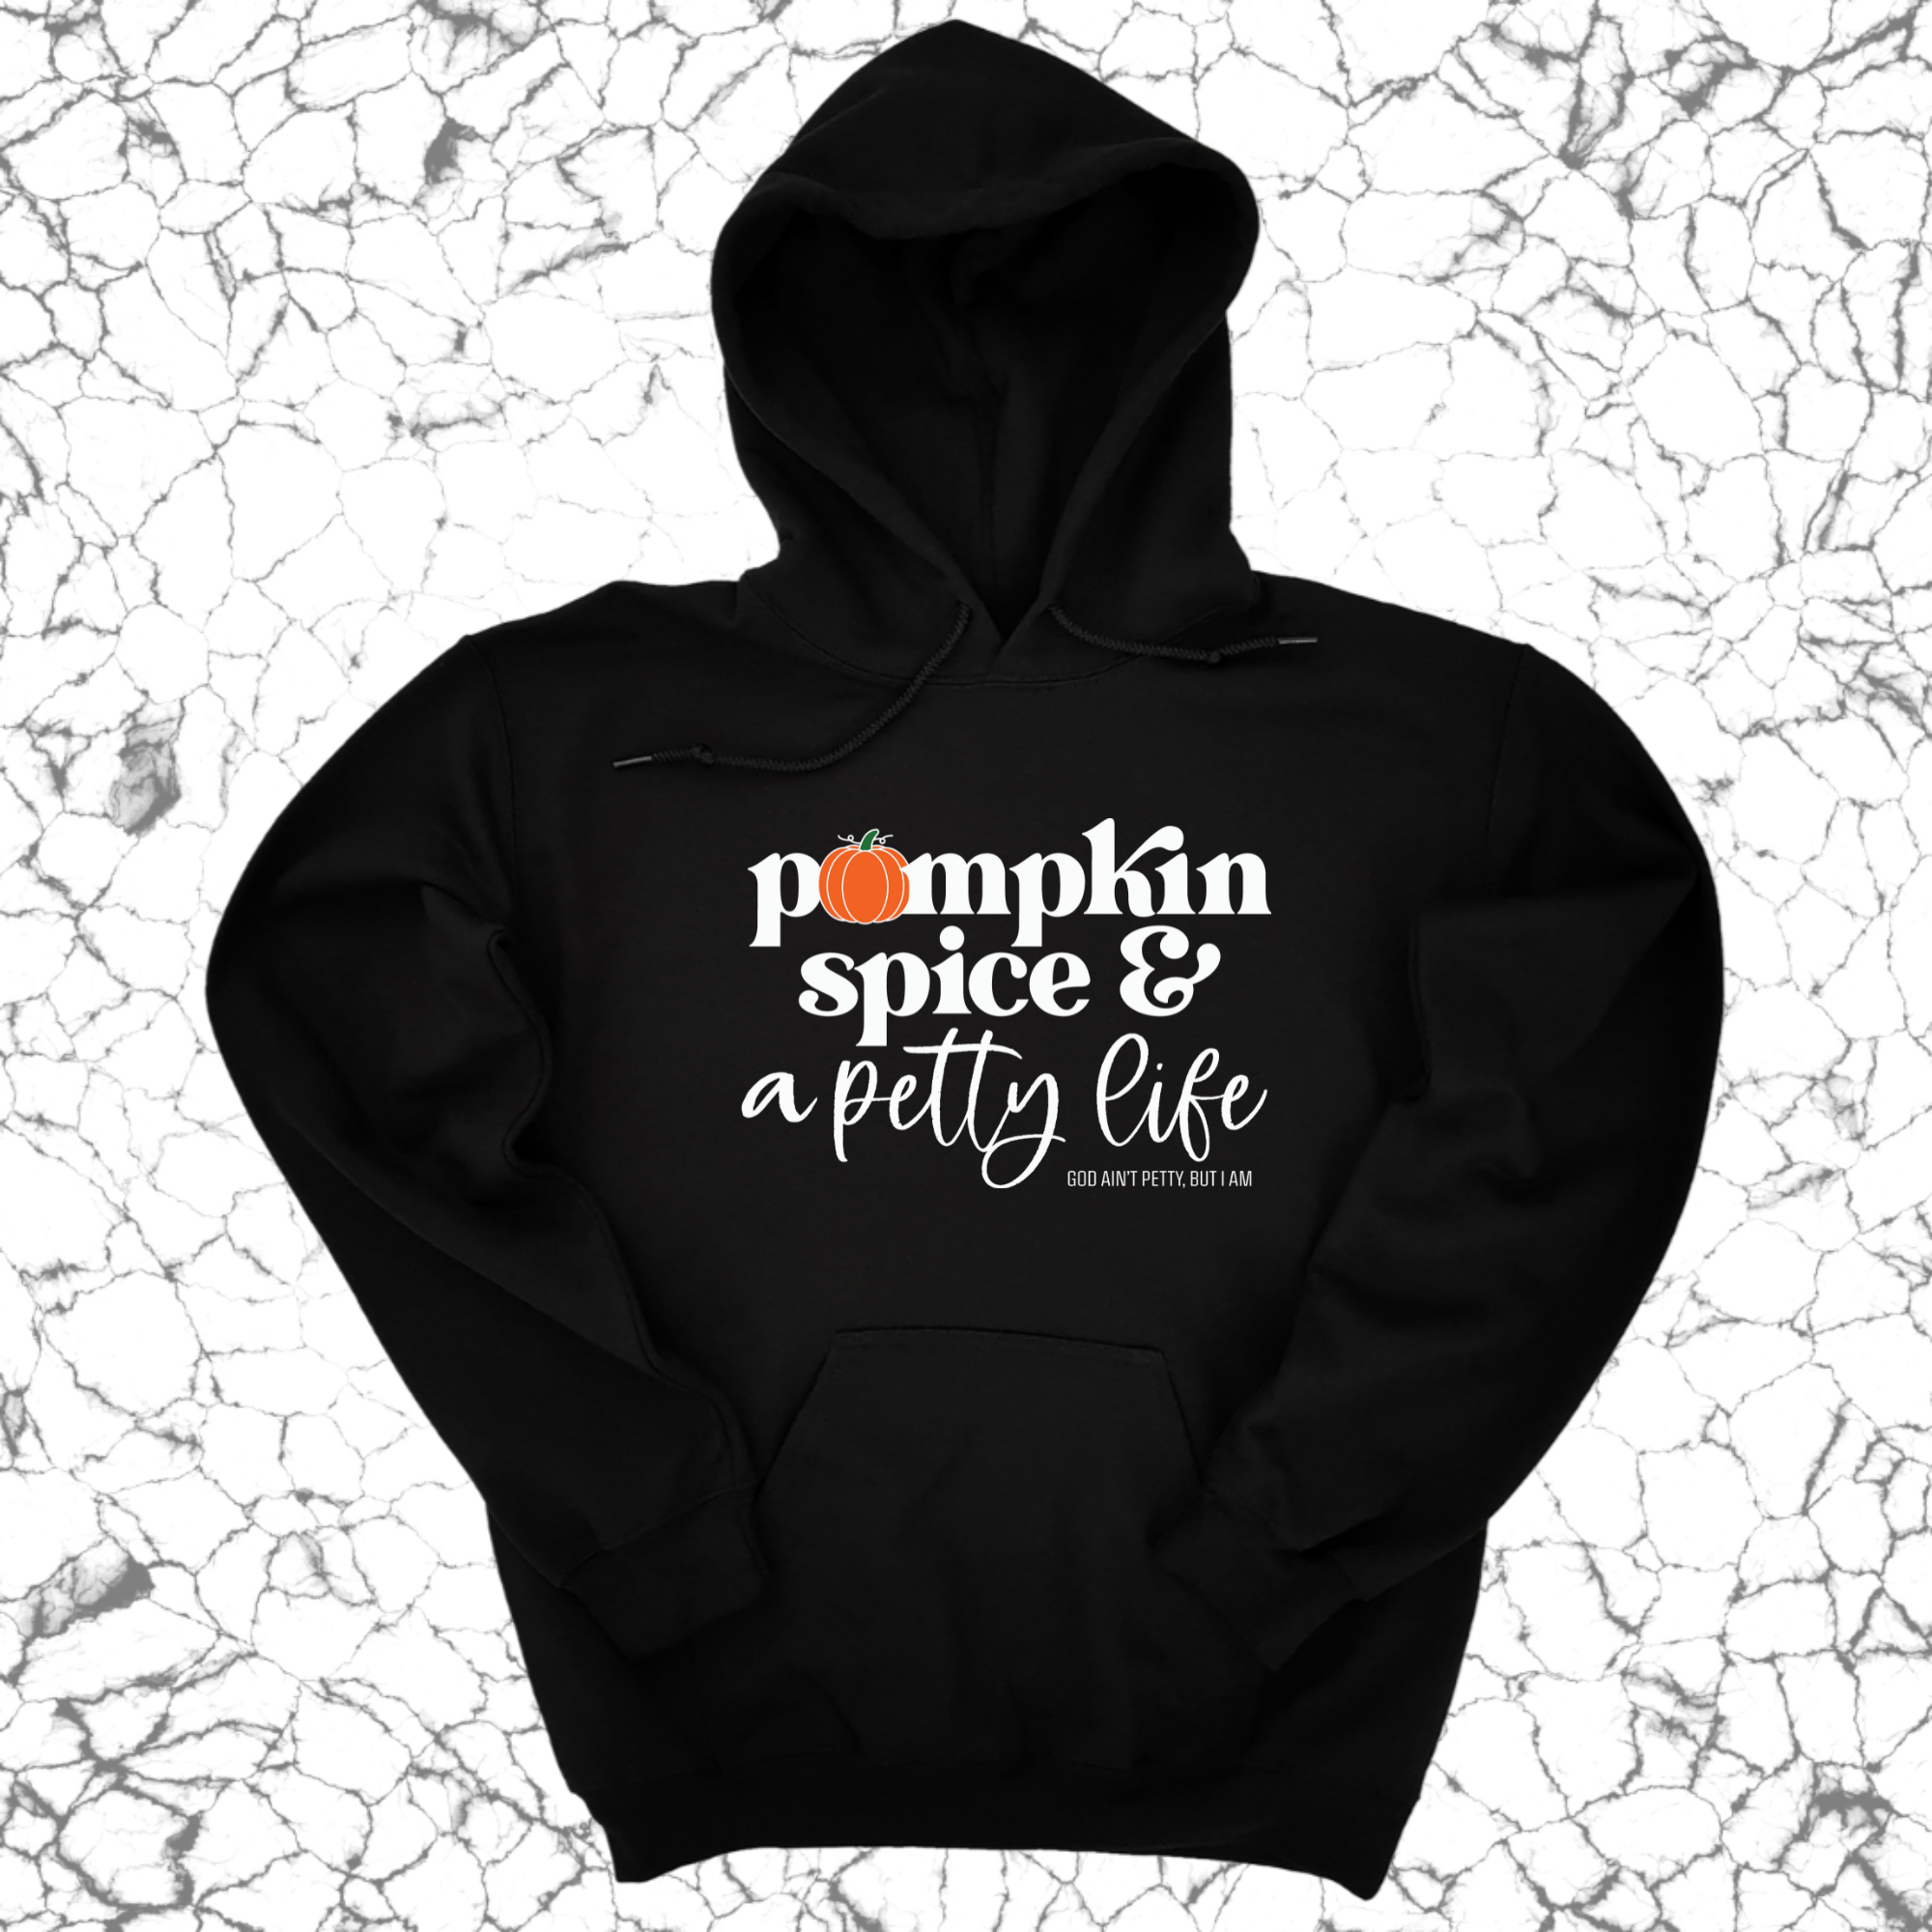 Pumpkin Spice and a Petty life Unisex Hoodie-Hoodie-The Original God Ain't Petty But I Am